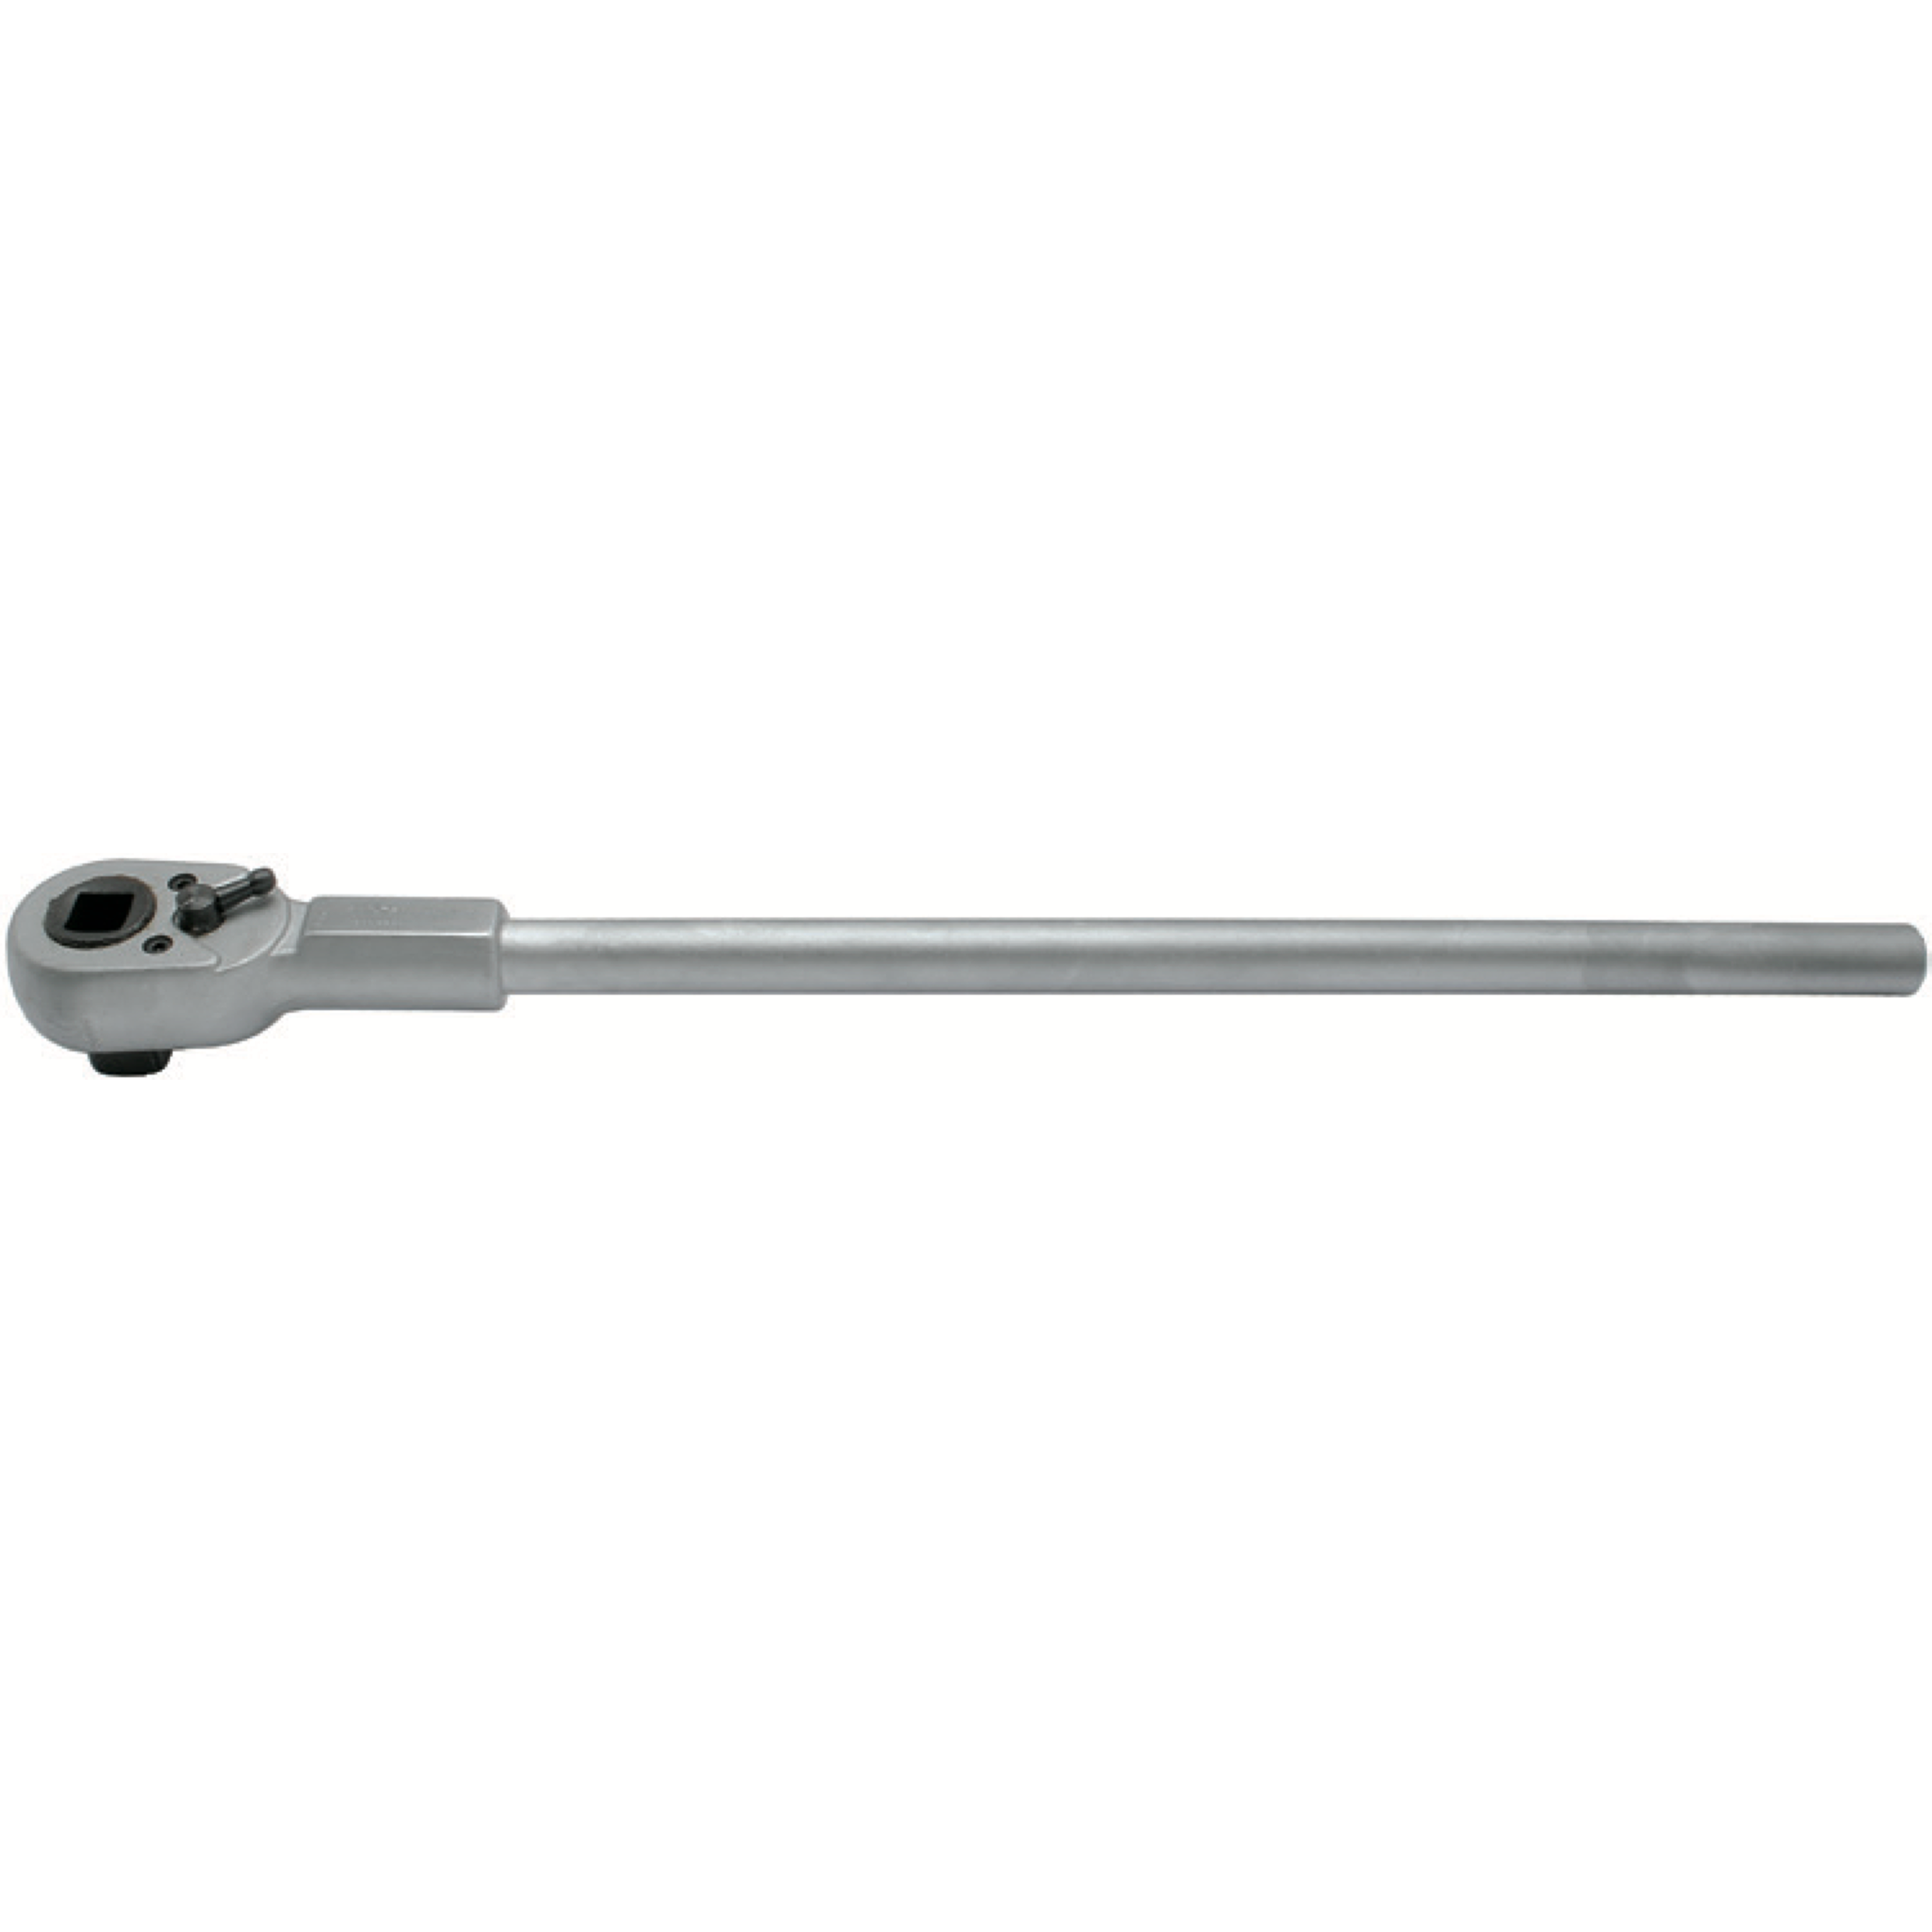 ELORA 780-E1 Repair Kit Reversible Ratchet 1", With Tommy Bar - Premium Reversible Ratchet from ELORA - Shop now at Yew Aik.